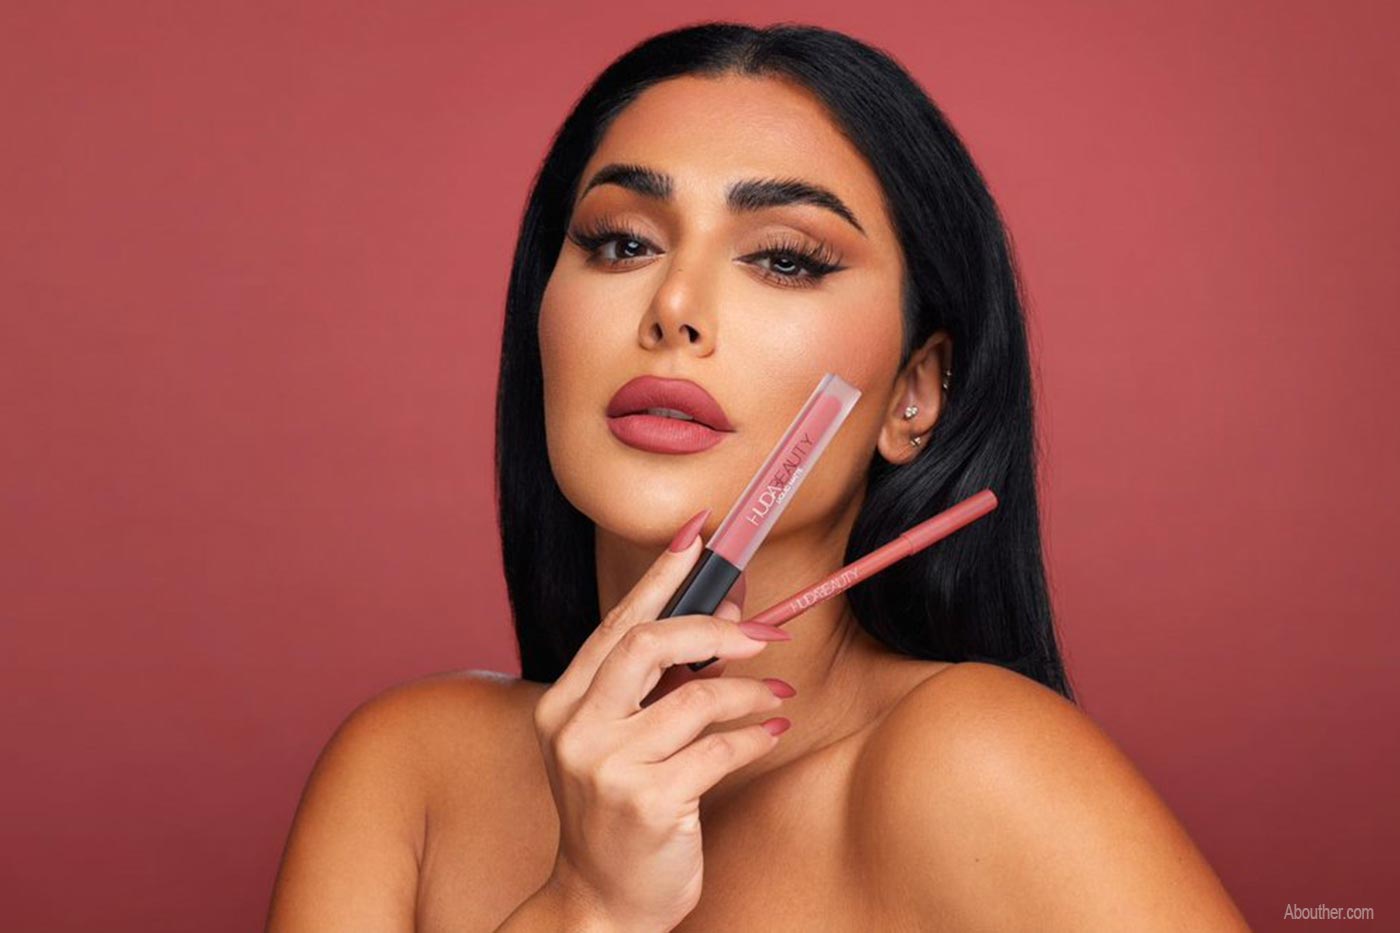 Huda Beauty becomes the ‘most hyped’ celebrity brand for 2022